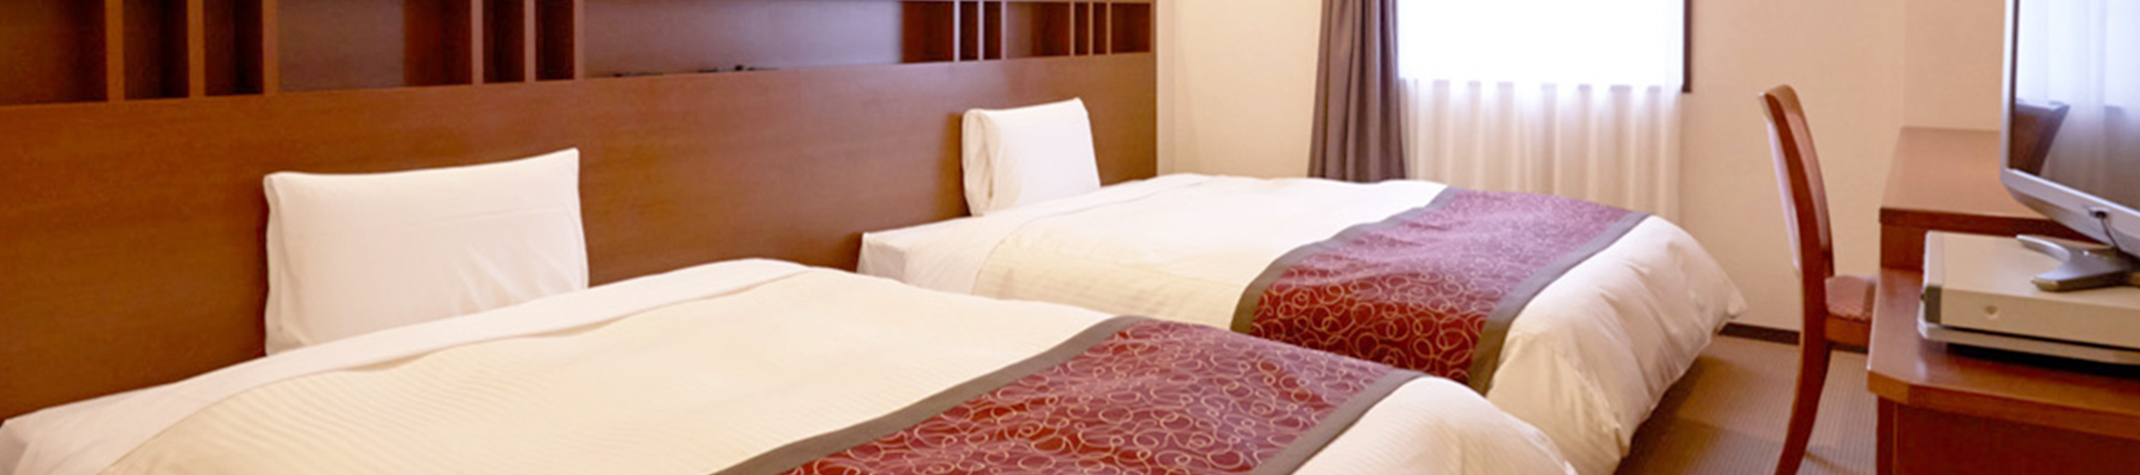 Introduction of room interior and facilities